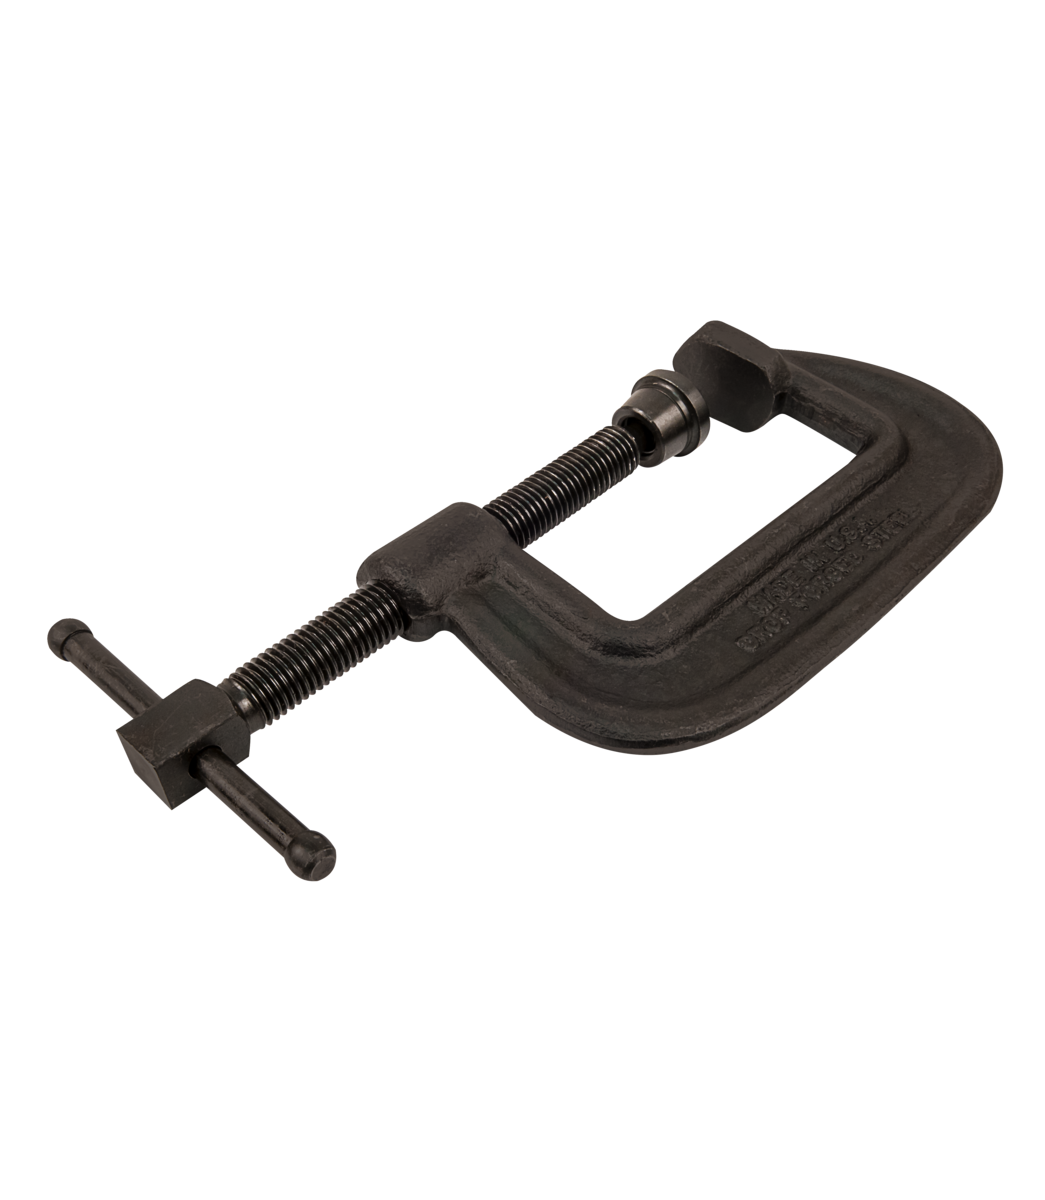 WILTON 100 Series Forged C-Clamp - Heavy-Duty 2-7/8 - 7-5/8” Opening Capacity